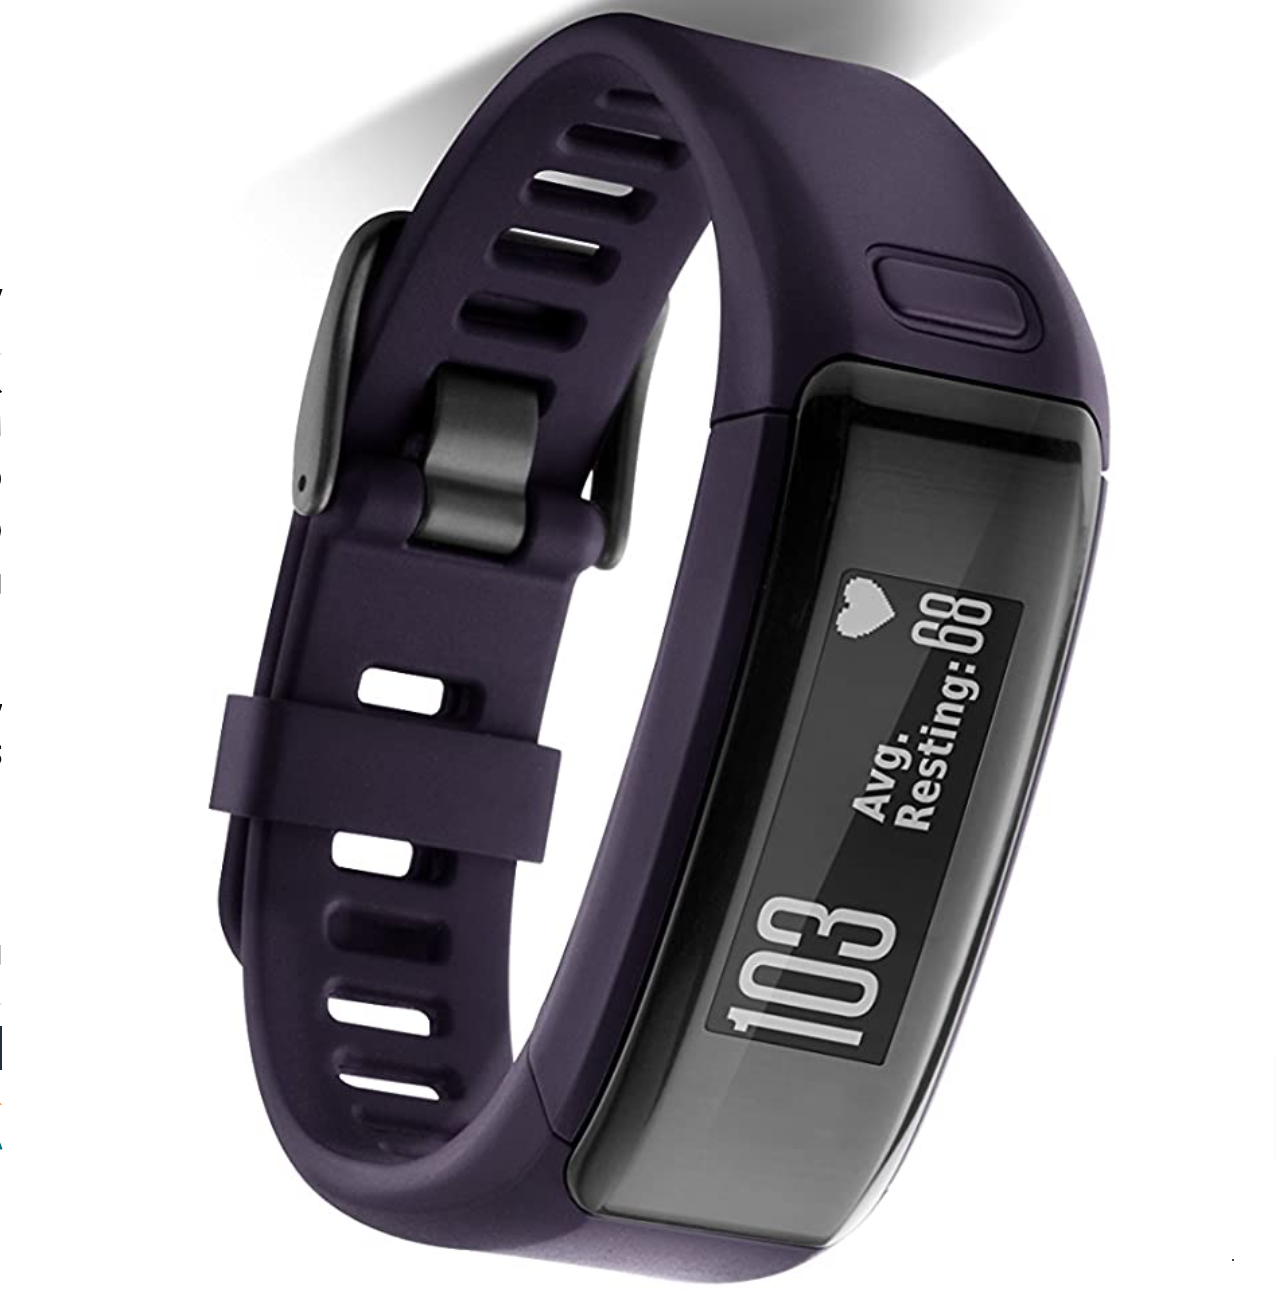 What is difference between fitness watch and fitness tracker?